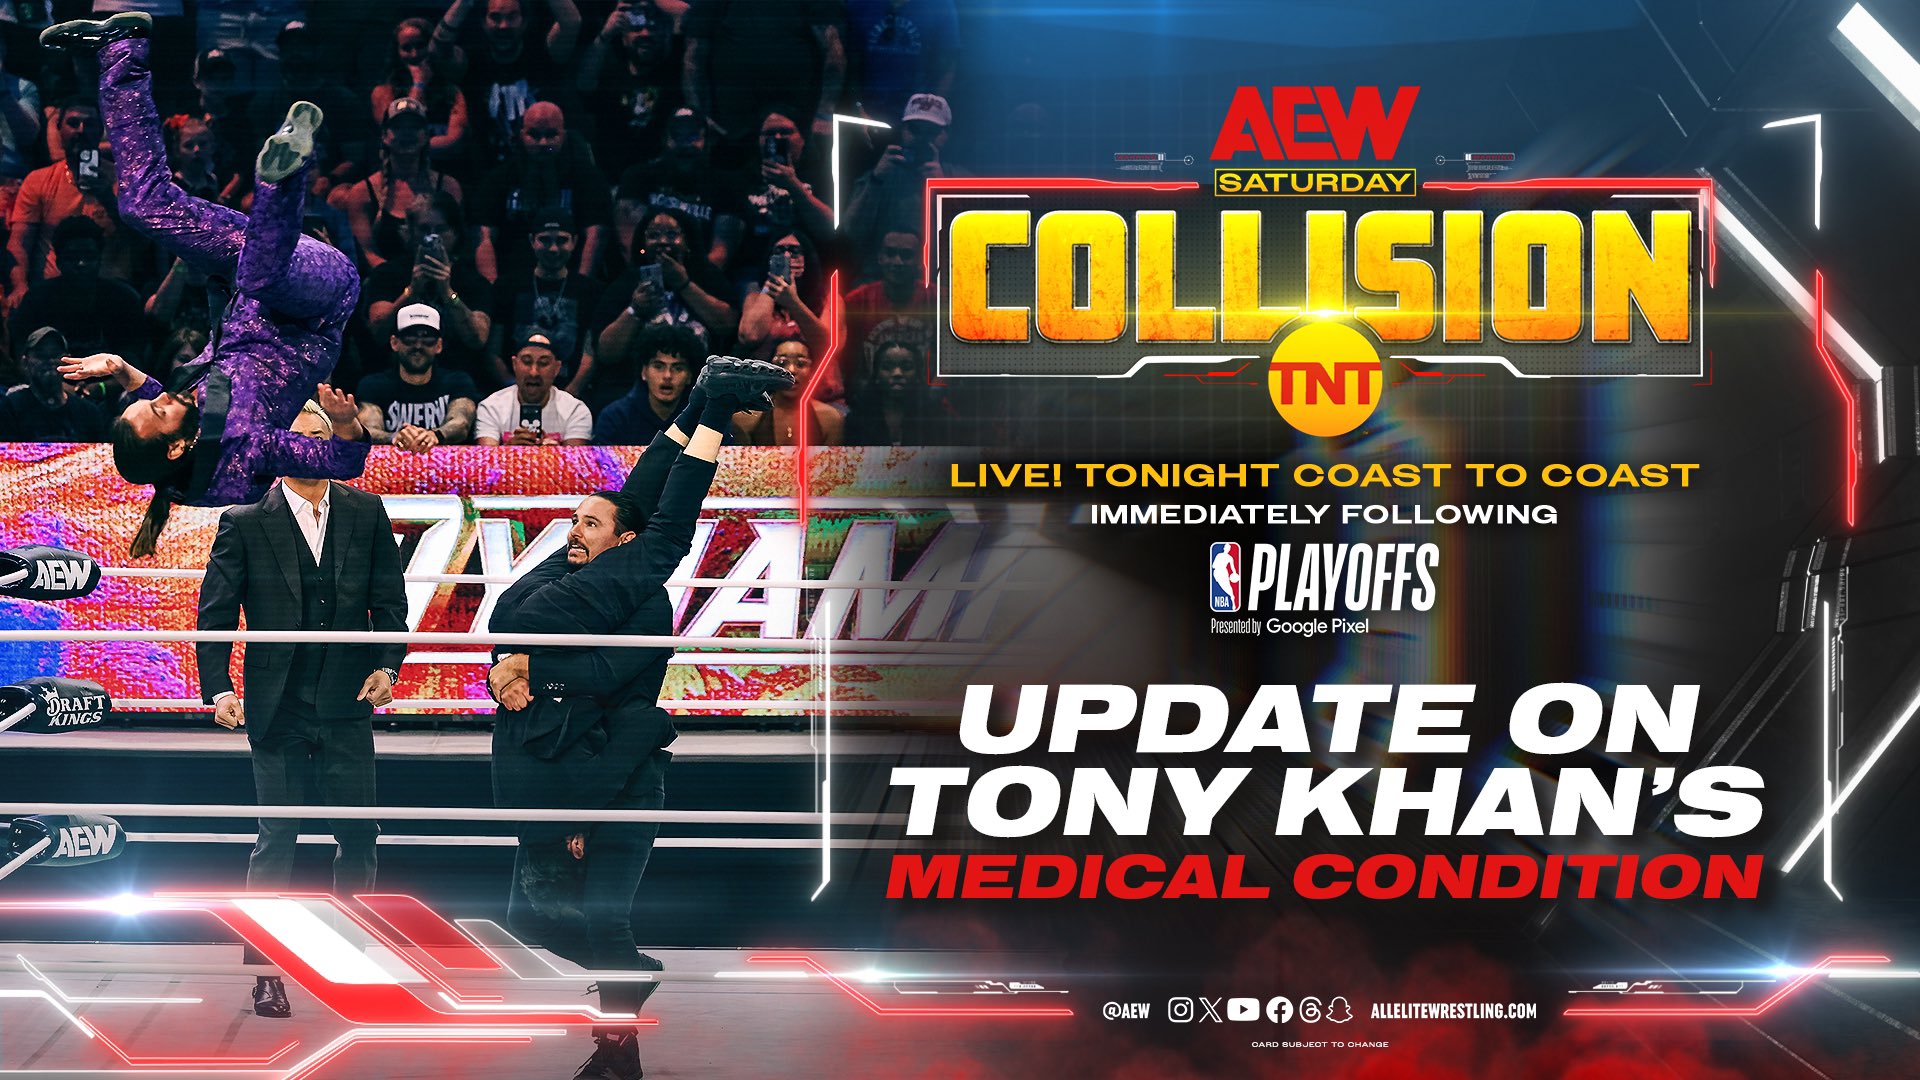 AEW Set to Announce Tony Khan’s Health Update During Collision Event; Impact Lineup Revised